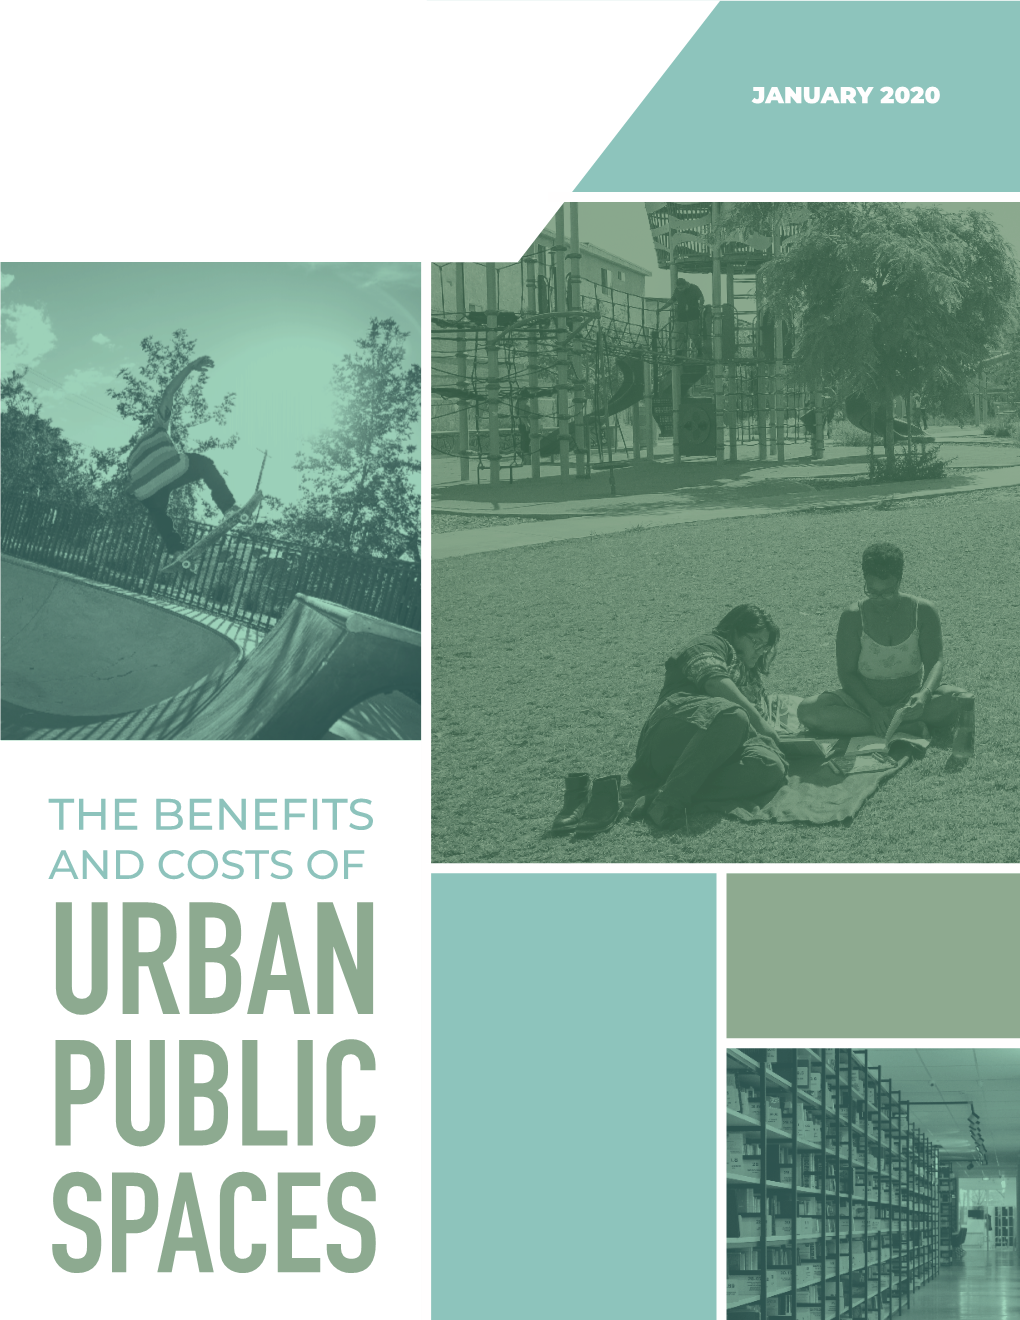 The Benefits and Costs of Urban Public Spaces the Benefits and Costs of Urban Public Spaces